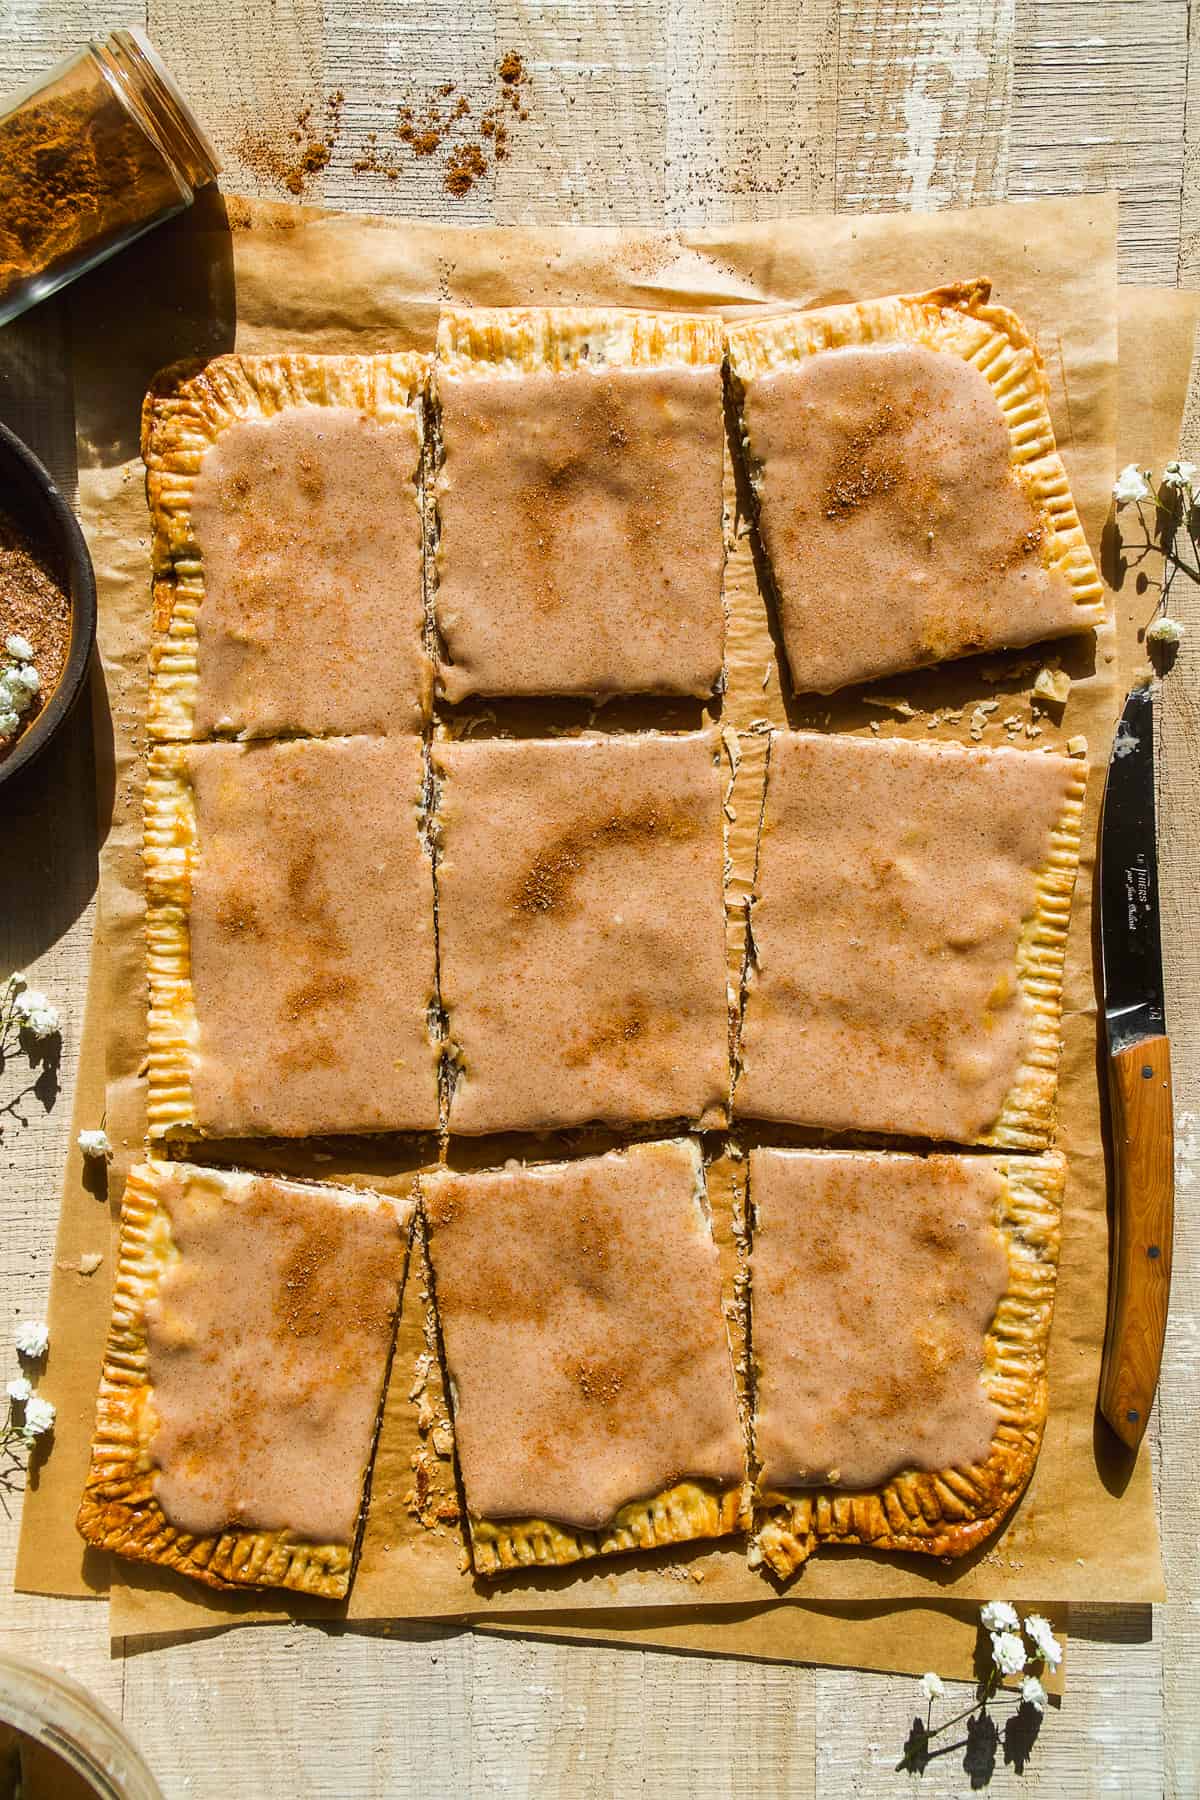 Overhead view of a giant snickerdoodle pop tart cut into pieces.